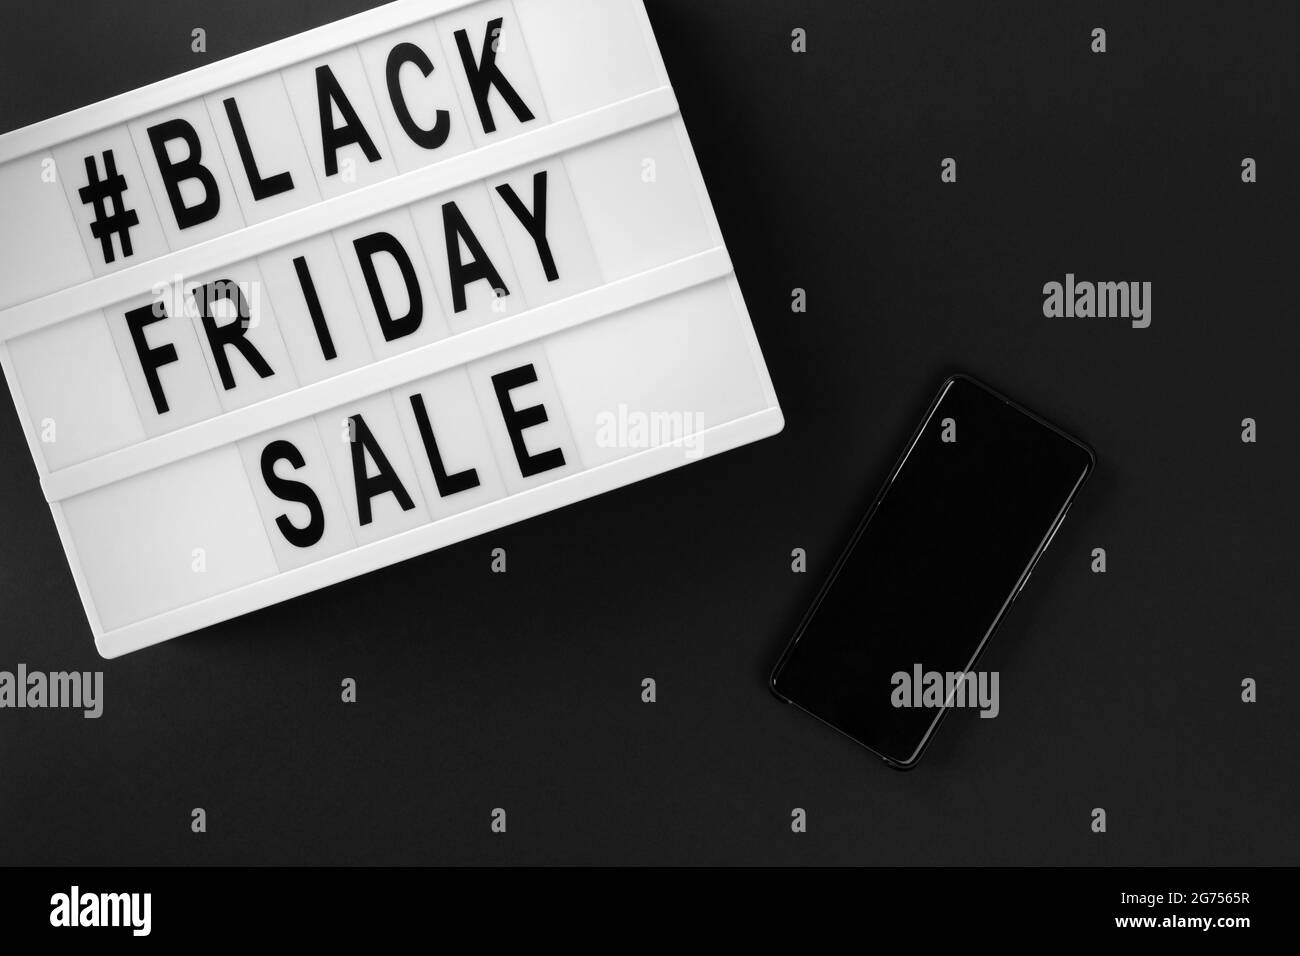 Flat lay top view promotion composition with Black friday sale text on lightbox Stock Photo